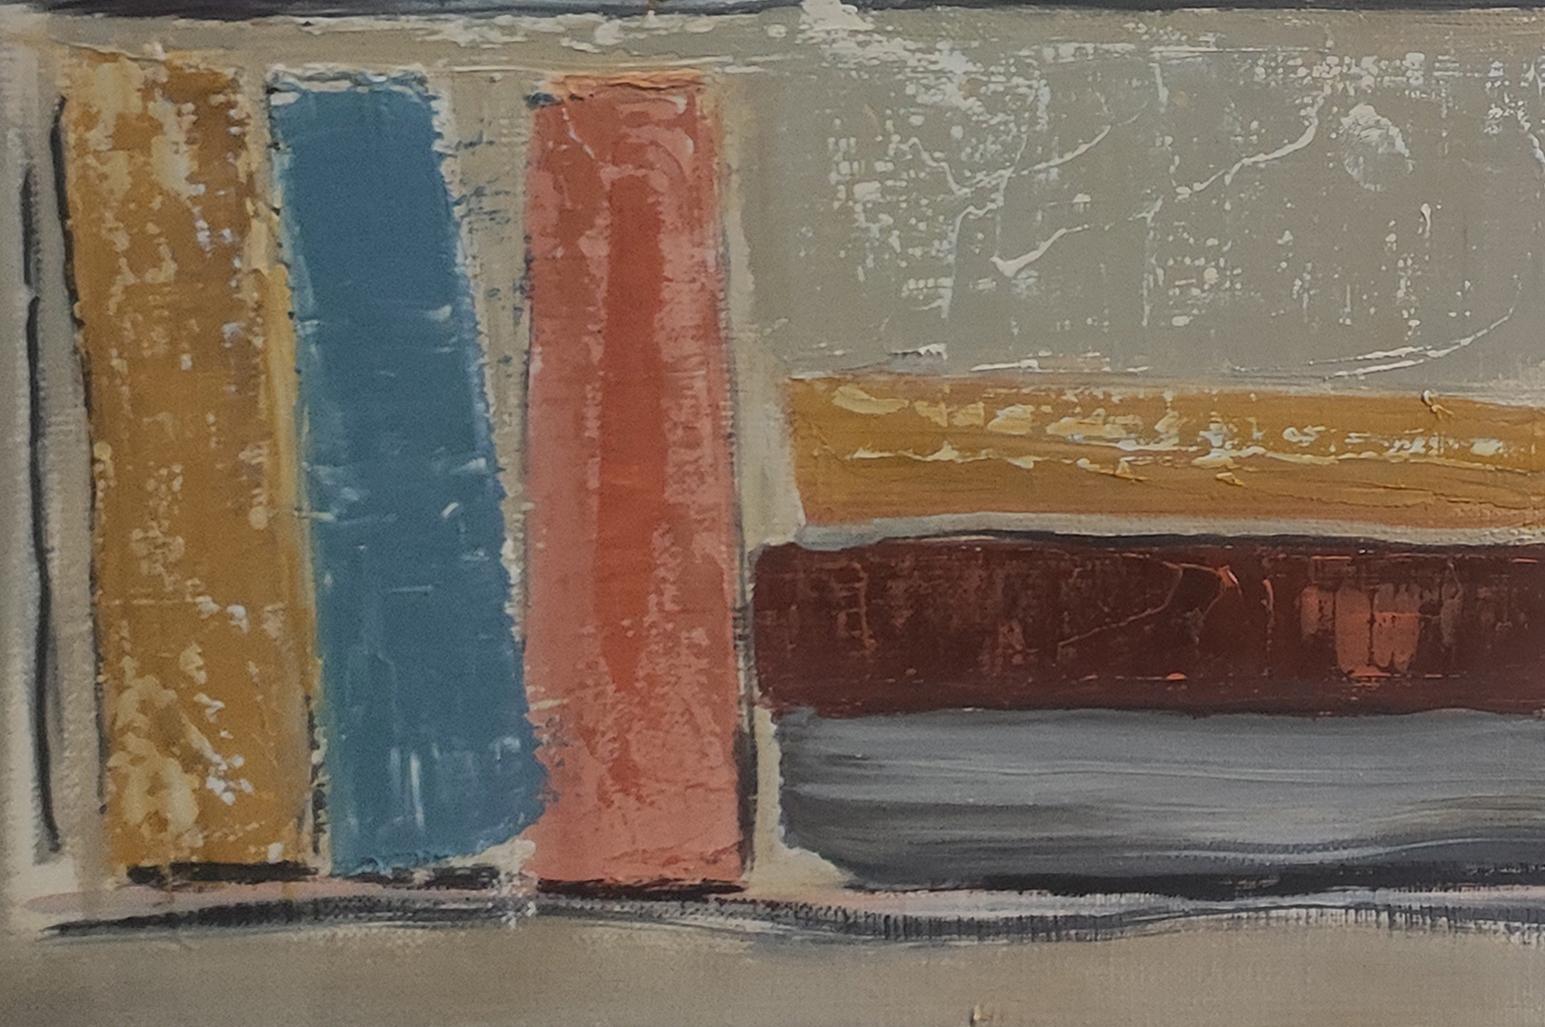 abstract and geometric painting of books in a library.
The colors are complementary: blue, gray, red, green and white
The library is a favorite subject of the artist who began his series in 2016 and is still relevant
Oil on canvas worked with a